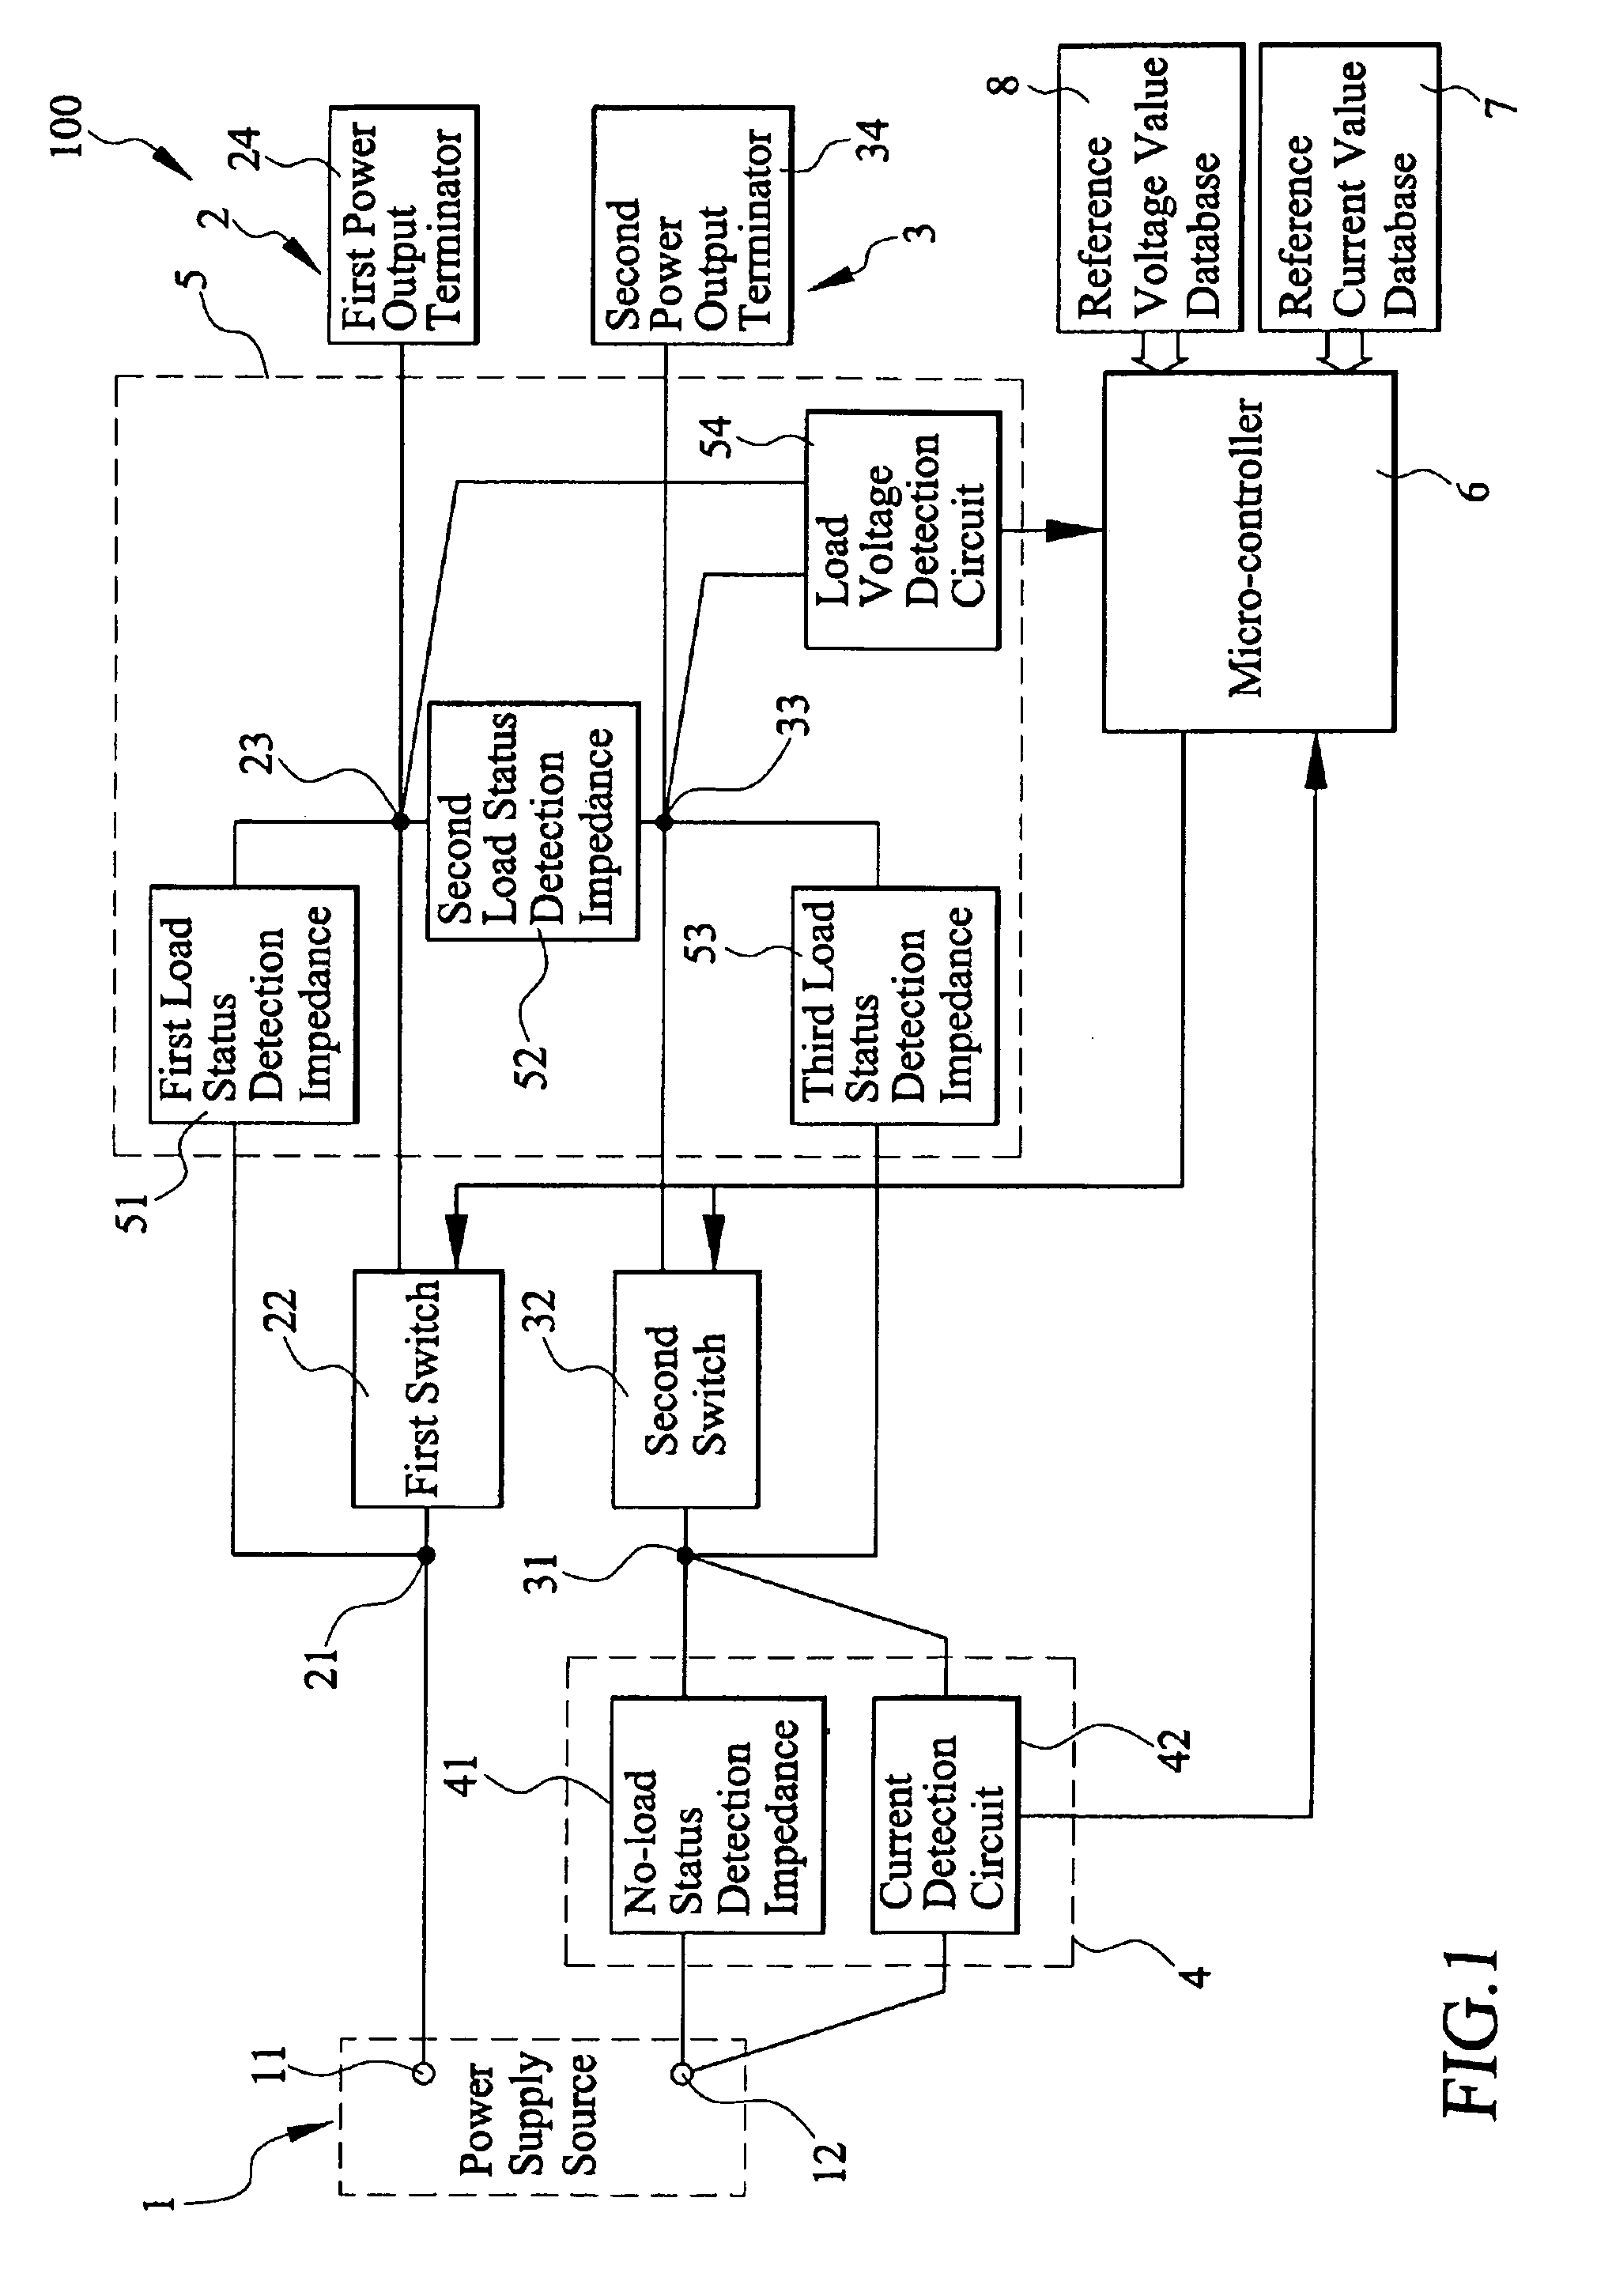 Electrical load status detection and control device